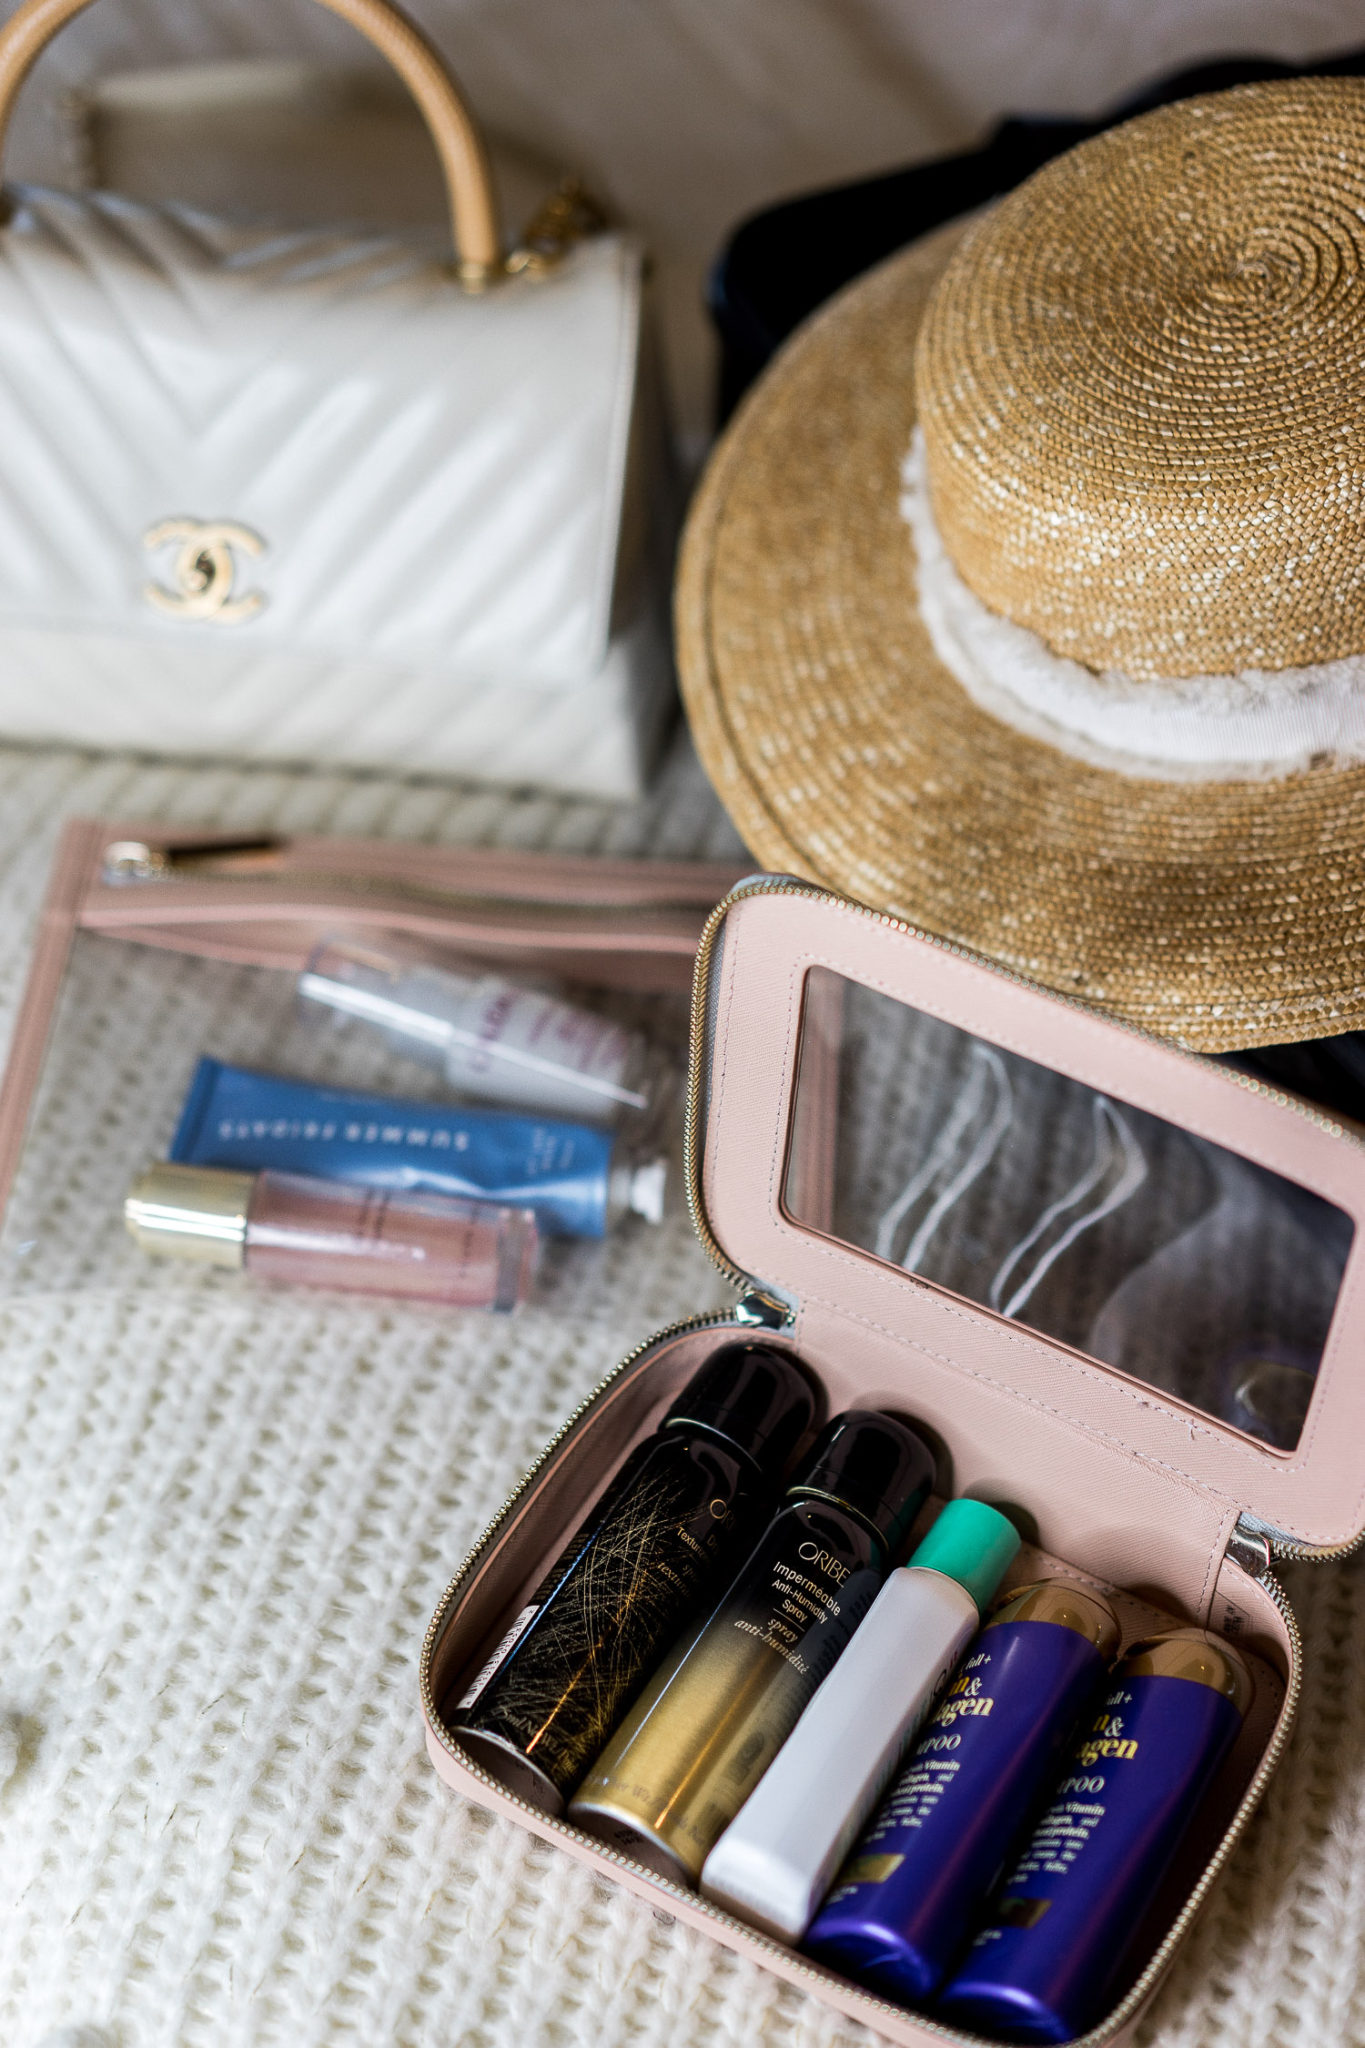  Packing for International Travel: Top 10 Tips